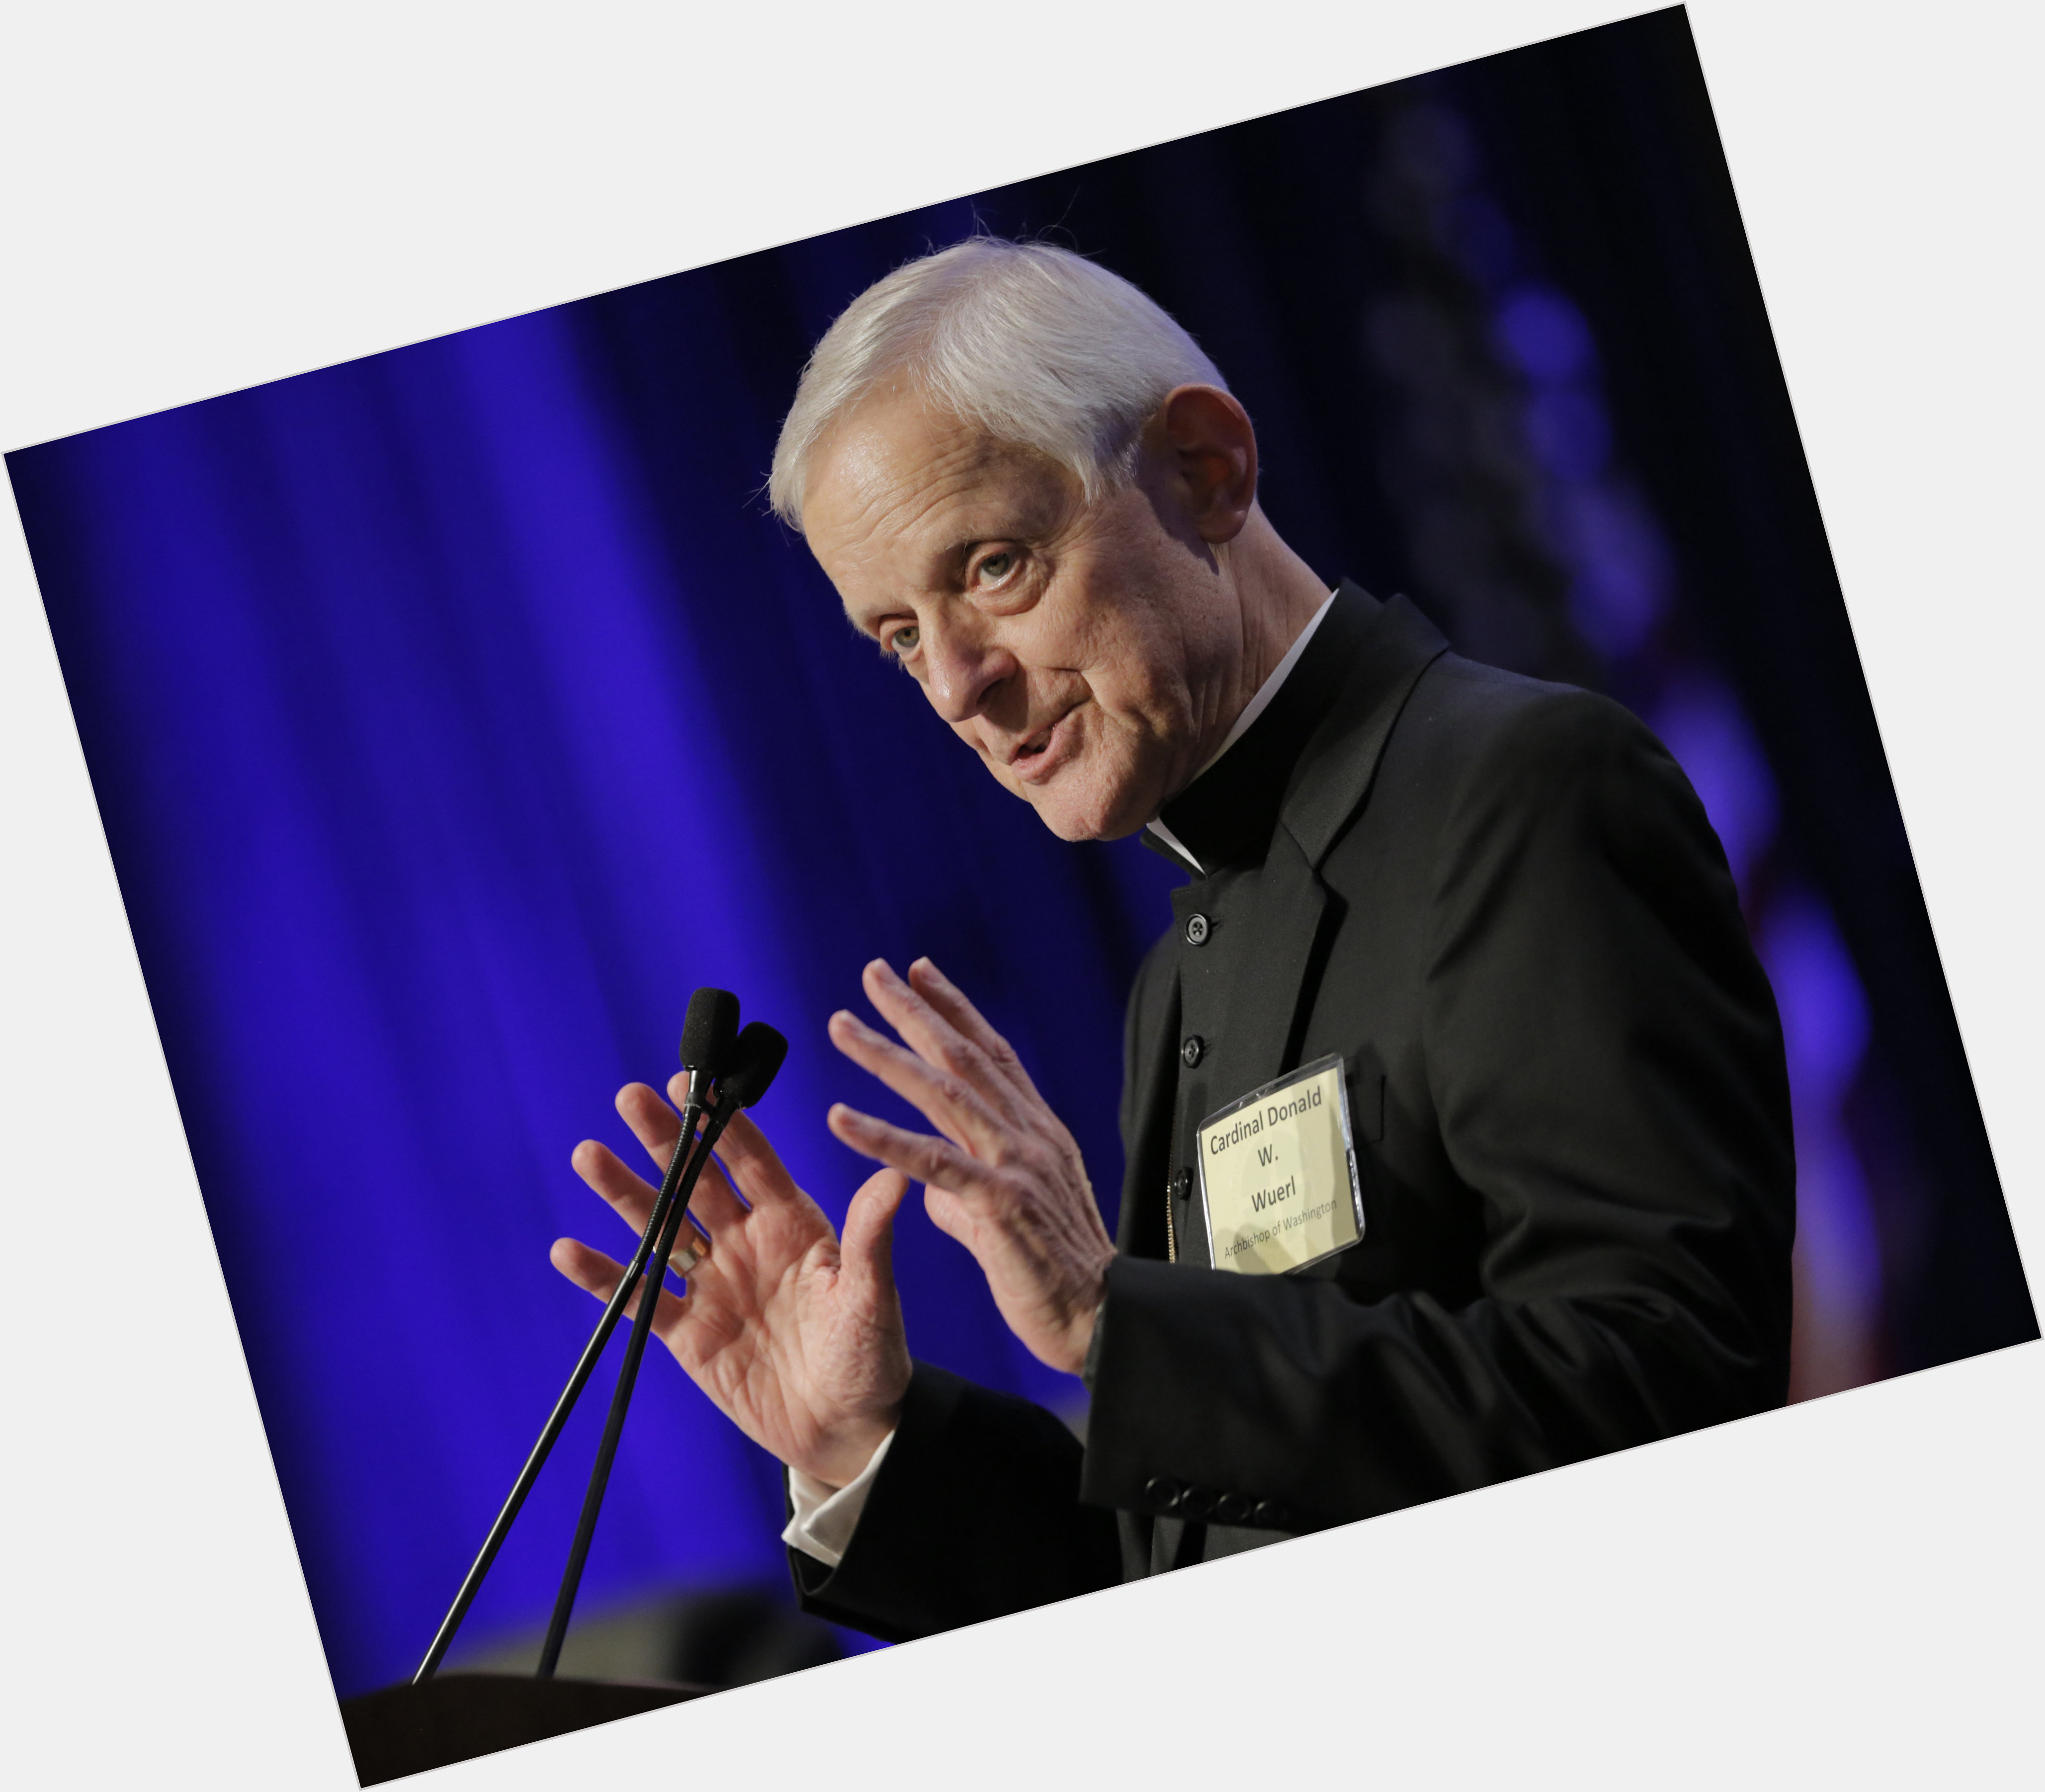 Https://fanpagepress.net/m/D/Donald Wuerl Exclusive Hot Pic 3